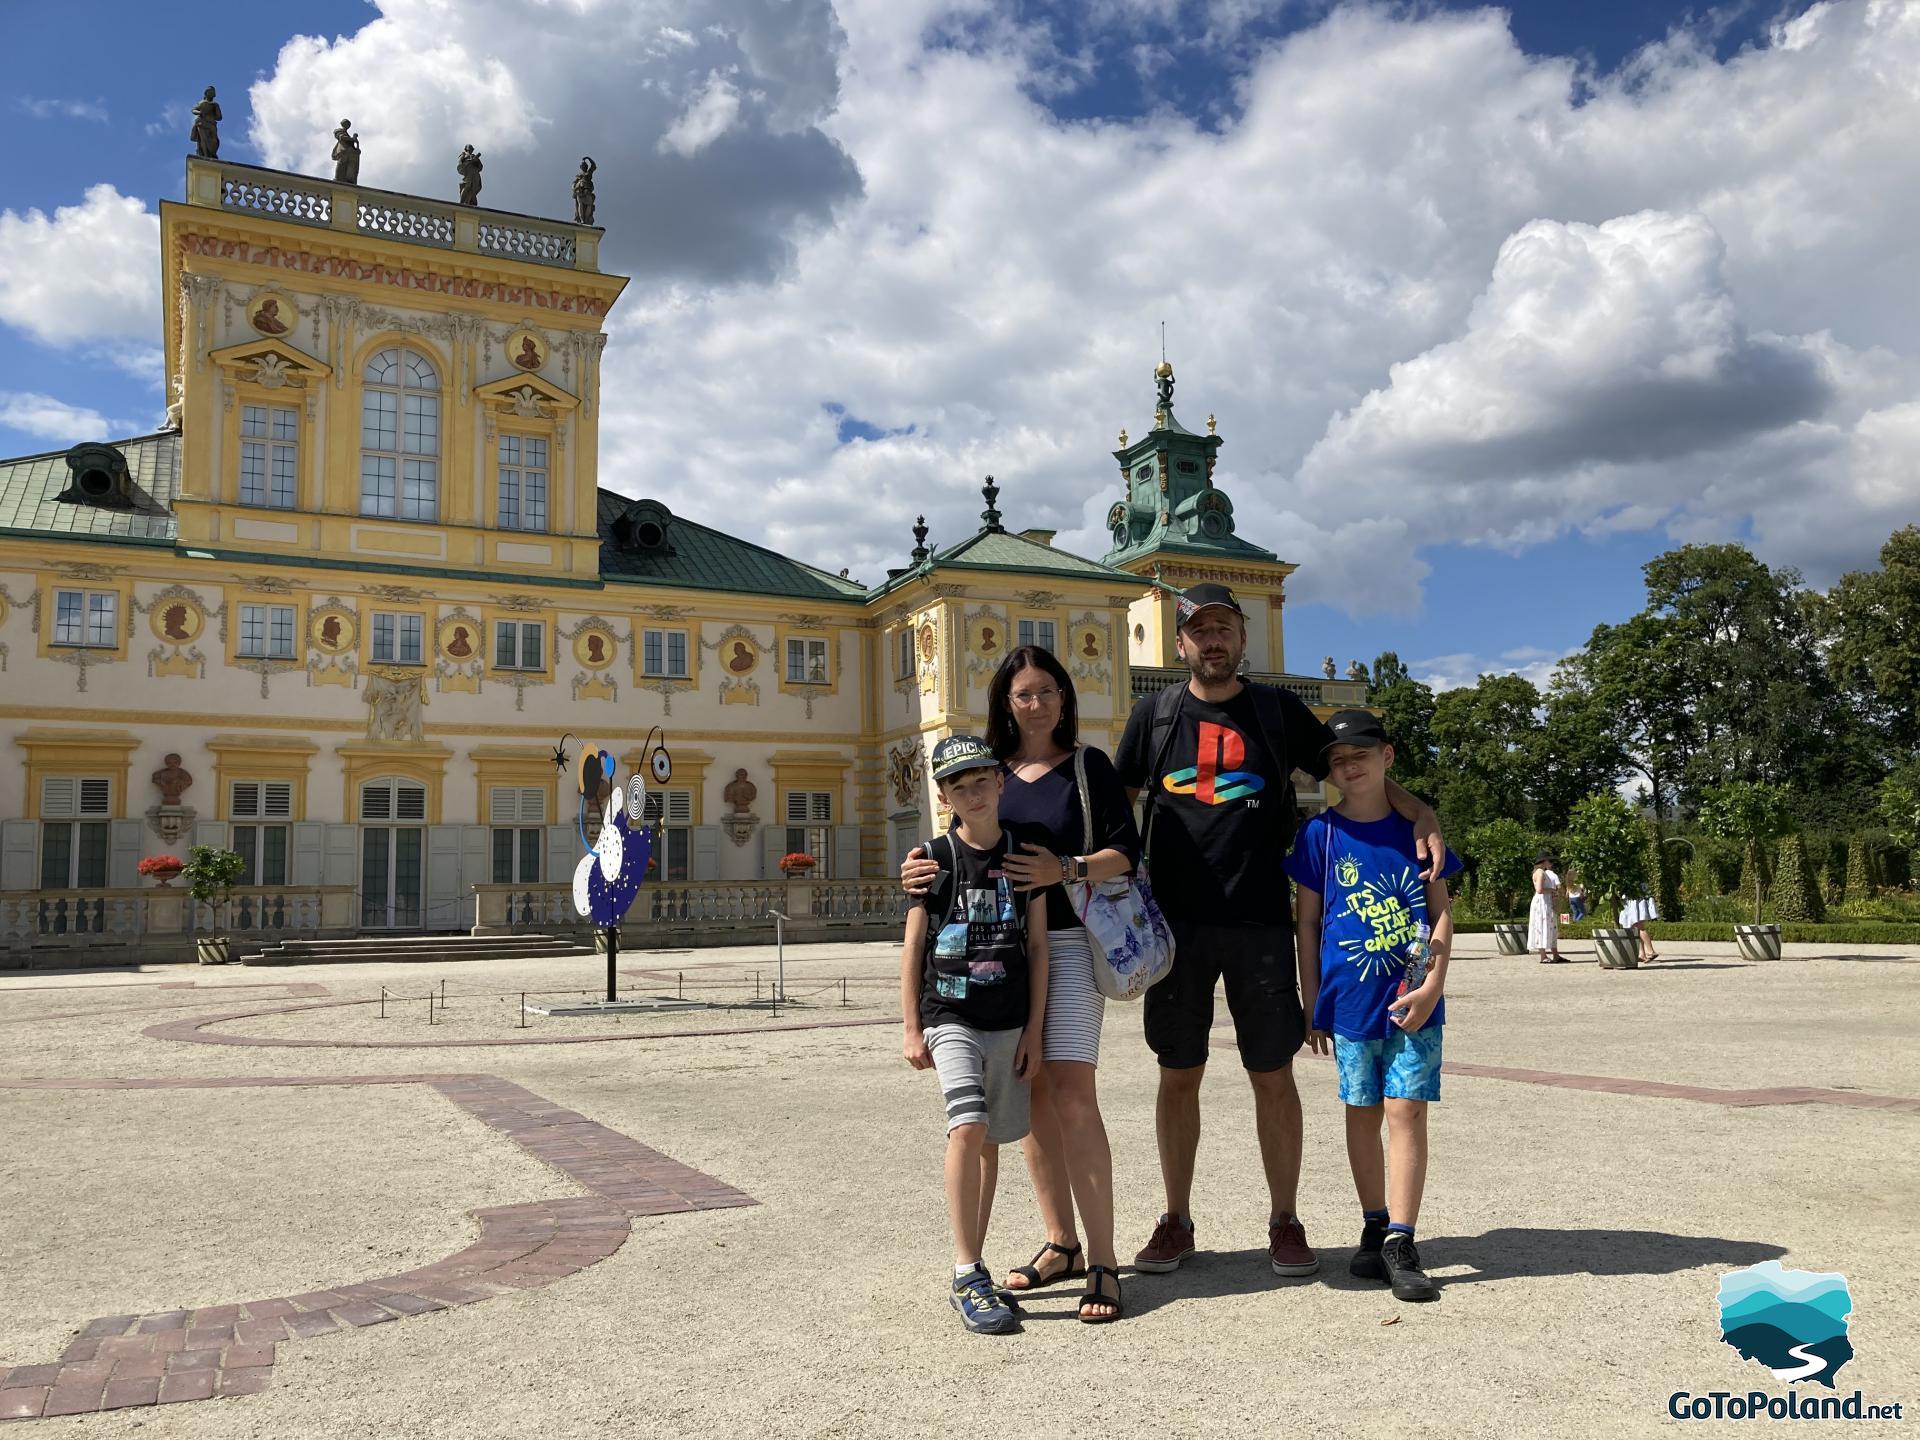 A woman, two boys and a man are standing in front of the baroque palace, the palace has yellow walls, and Roman style statues on top